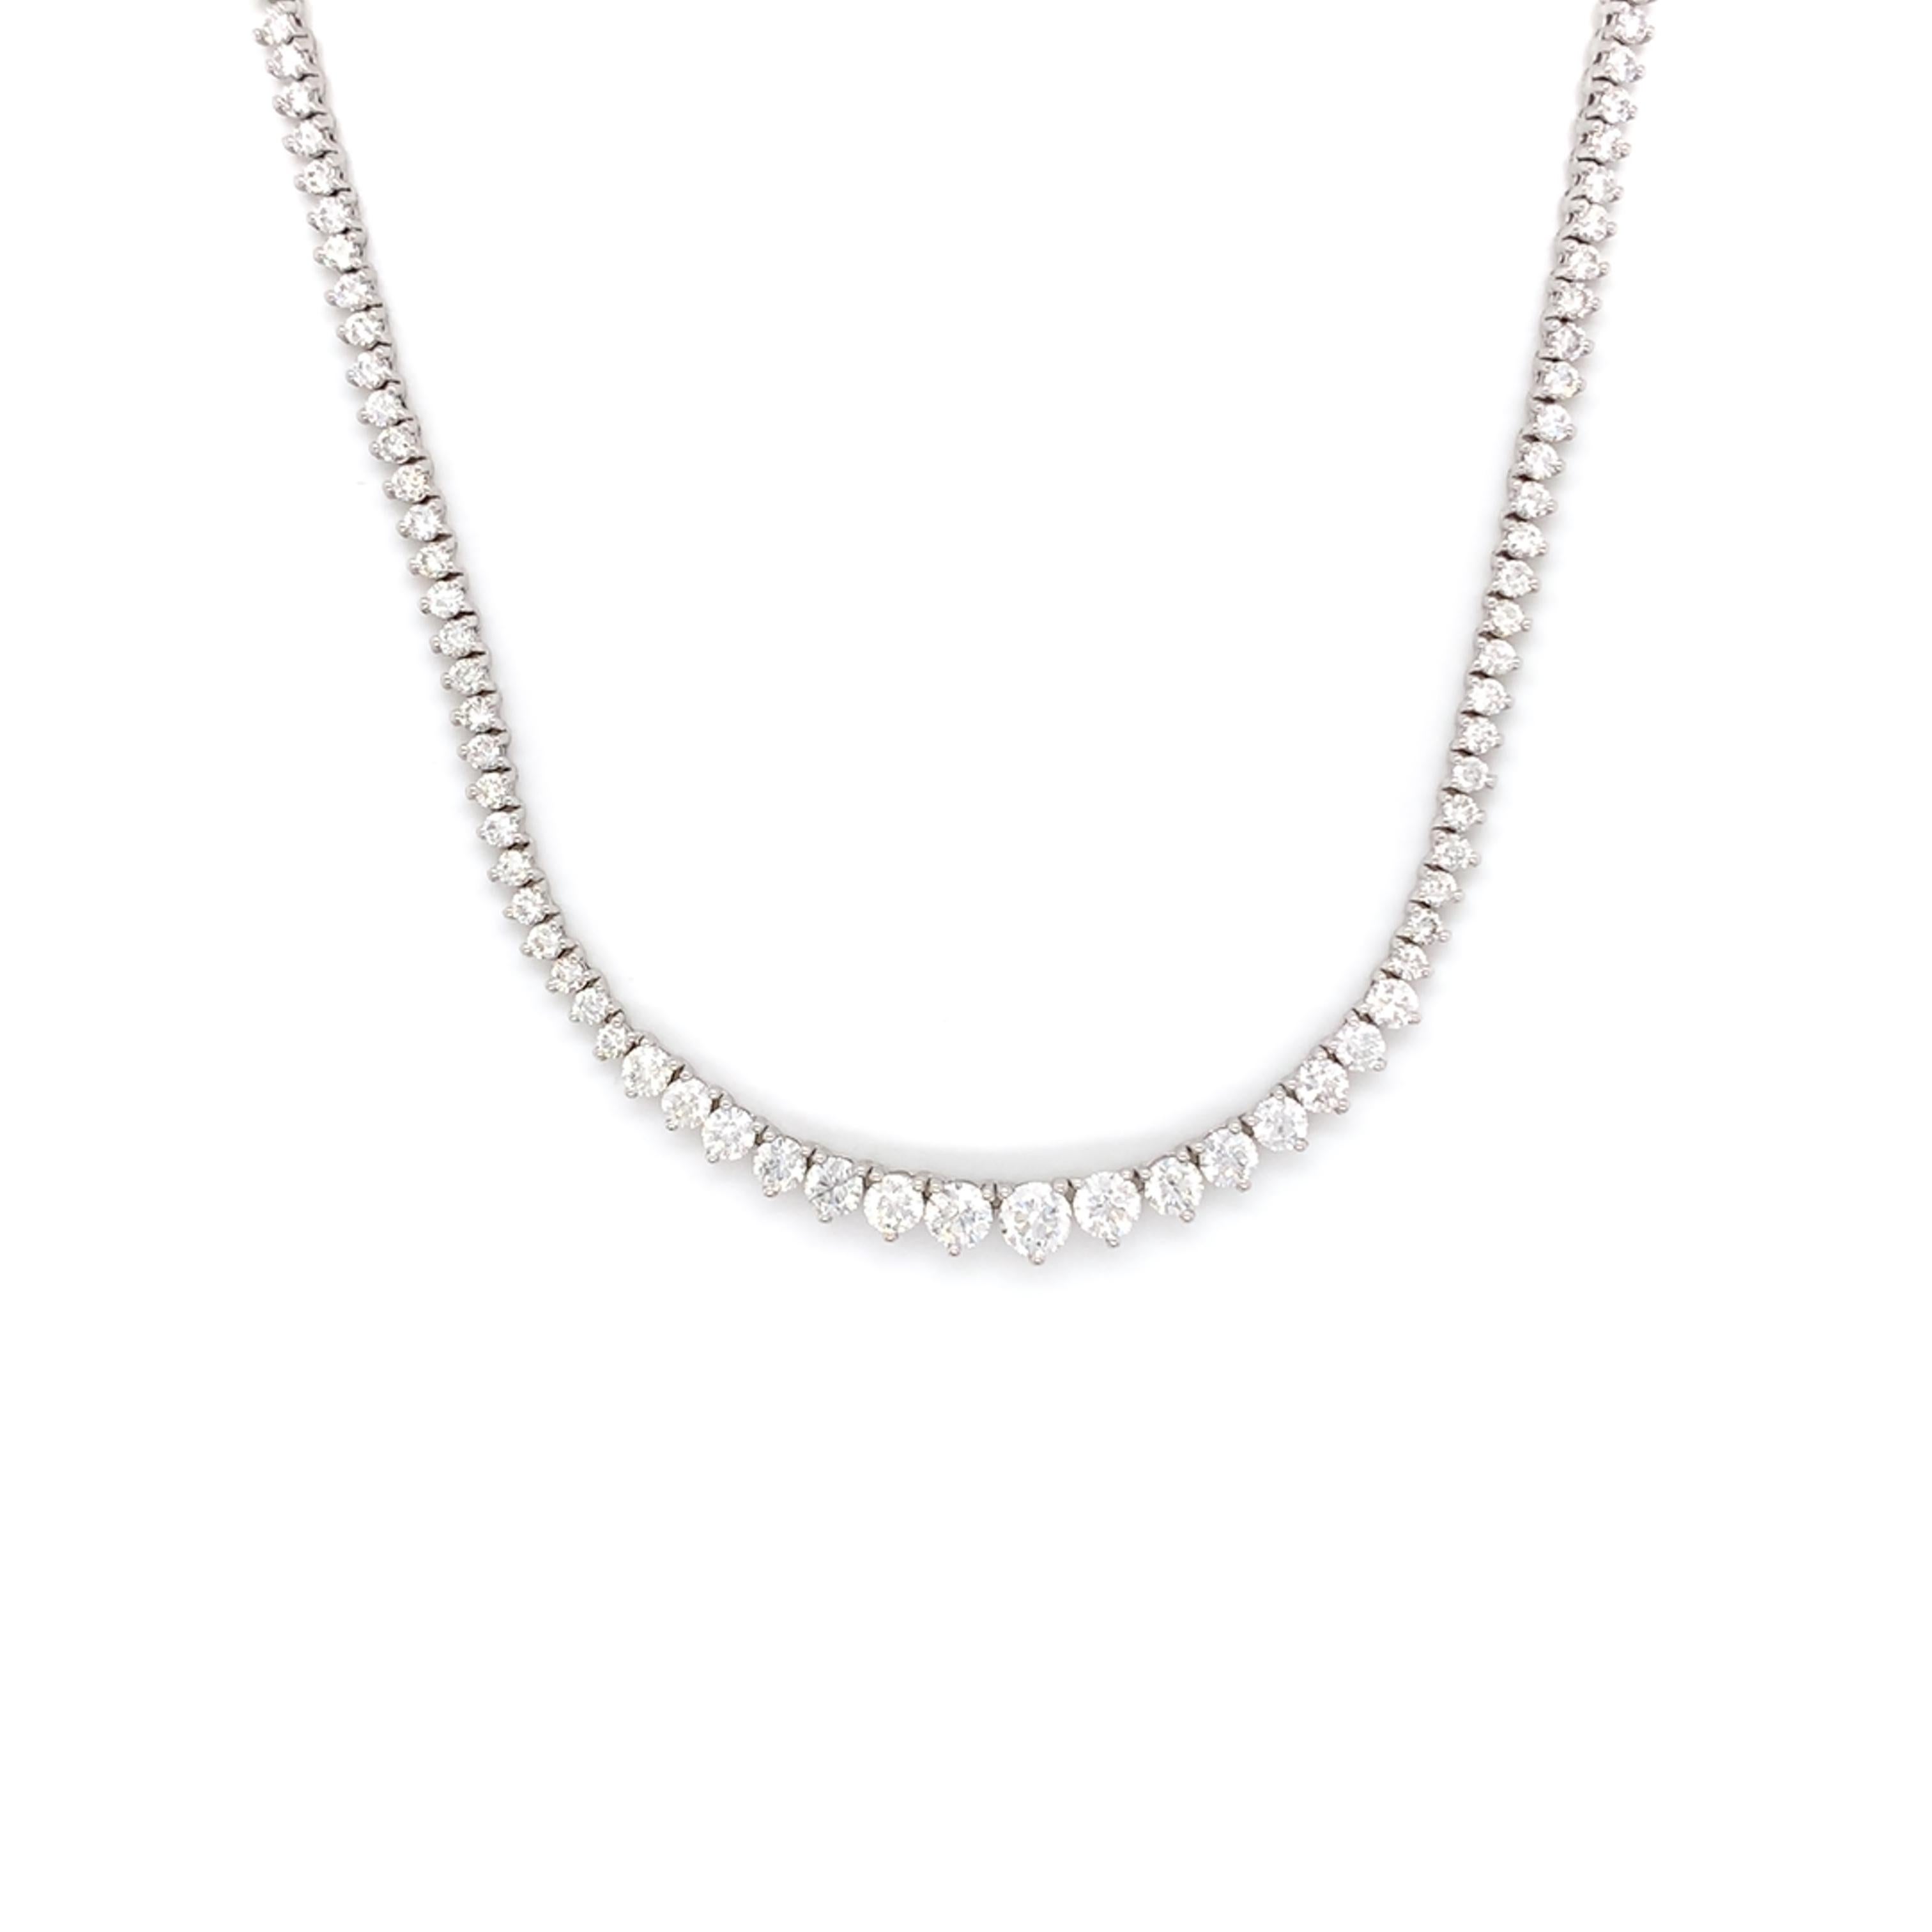 Diamond Riviera/Tennis Necklace made with real/natural brilliant cut diamonds. Total Diamond Weight: 3.14 carats. Diamond Quantity: 71 round diamonds. Color: G. Clarity: SI. Mounted on 18kt white gold.